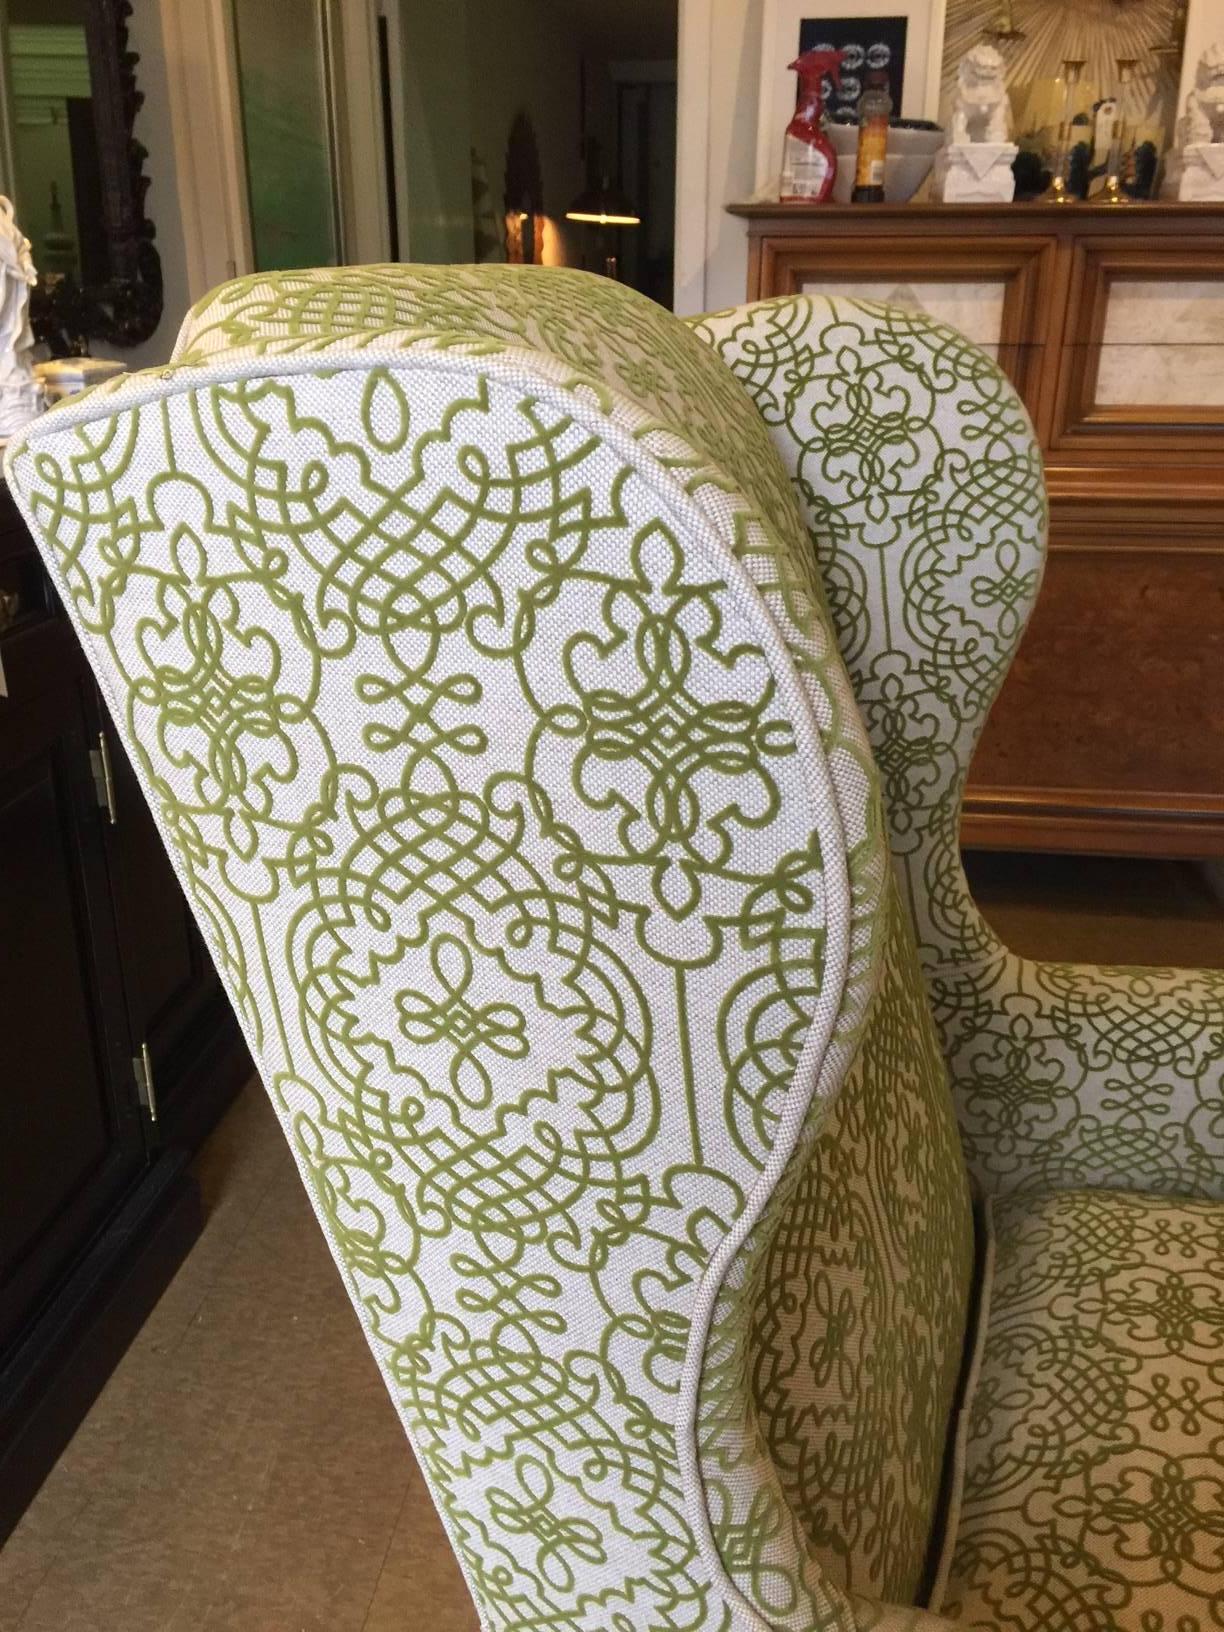 American Queen Anne Style Wingback Chair